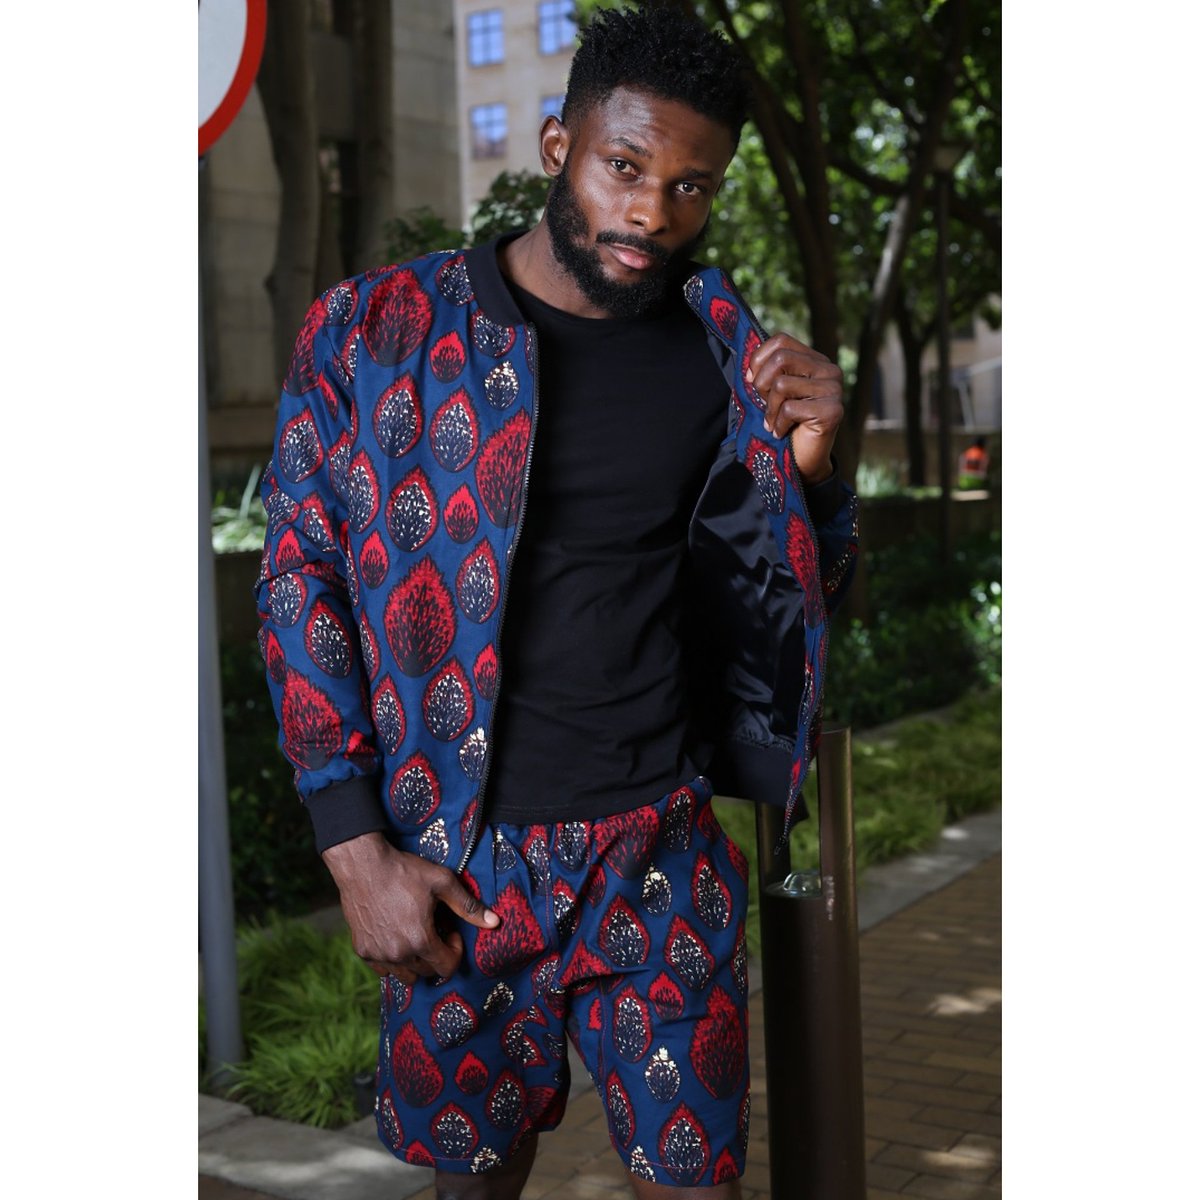 We hope the New year has started off on a good note for you. Why don't you go through to our store and check out this Red Leaf combo. The print is perfect for all occasions as well easy to #style. Available on our #onlinestore or #theboxshopmidrand #BuyLocal #Africa #Mensfashion